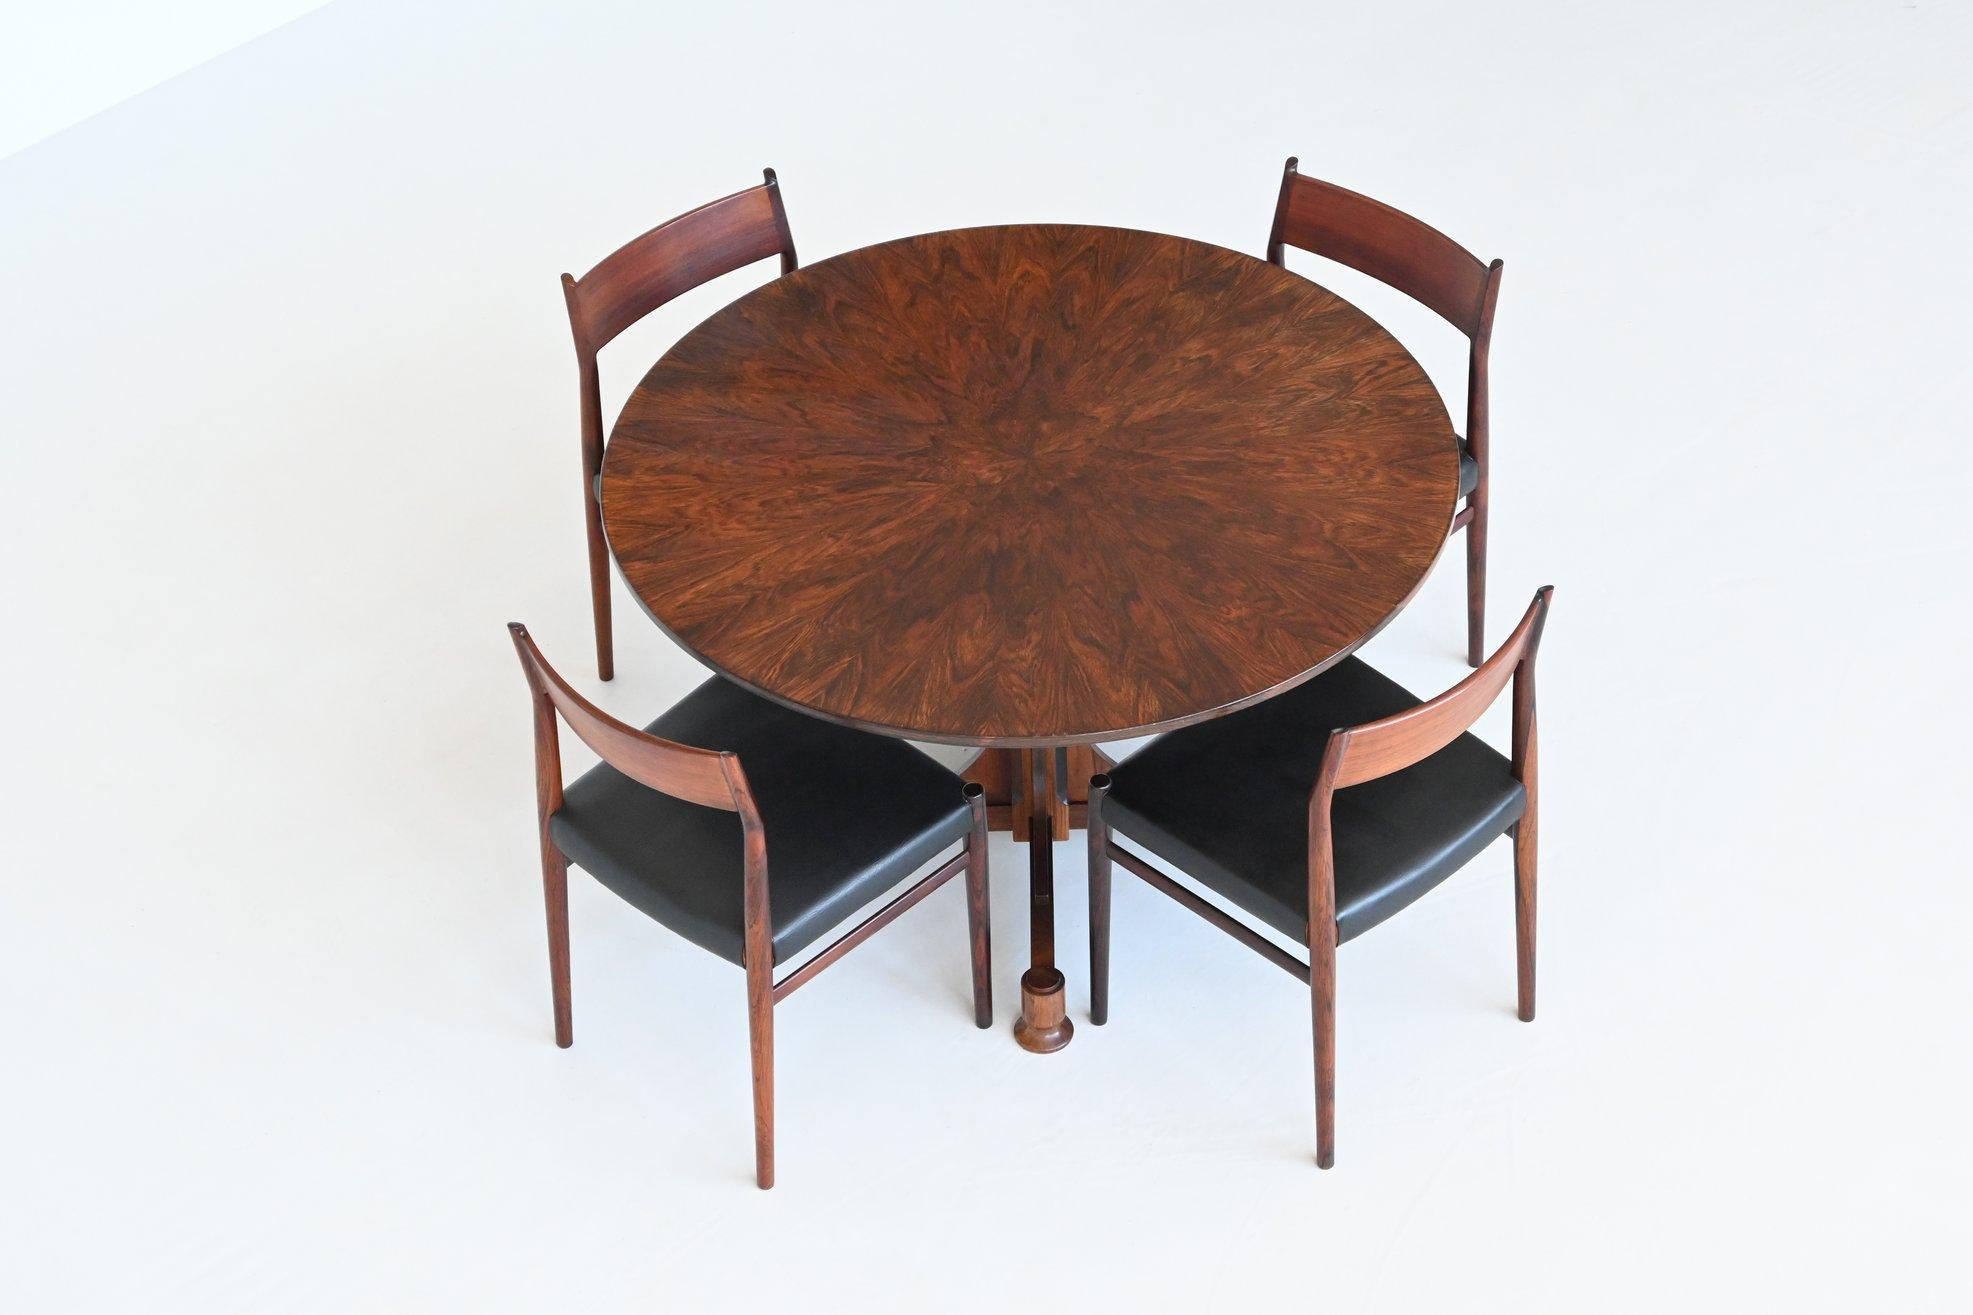 Amazing Art Deco Fratelli Proserpio style dining table by unknown designer or manufacturer, Italy 1960. This wonderful unique table featuring a round shaped top which is supported by a sculptural pedestal. The rosewood veneered top shows a beautiful